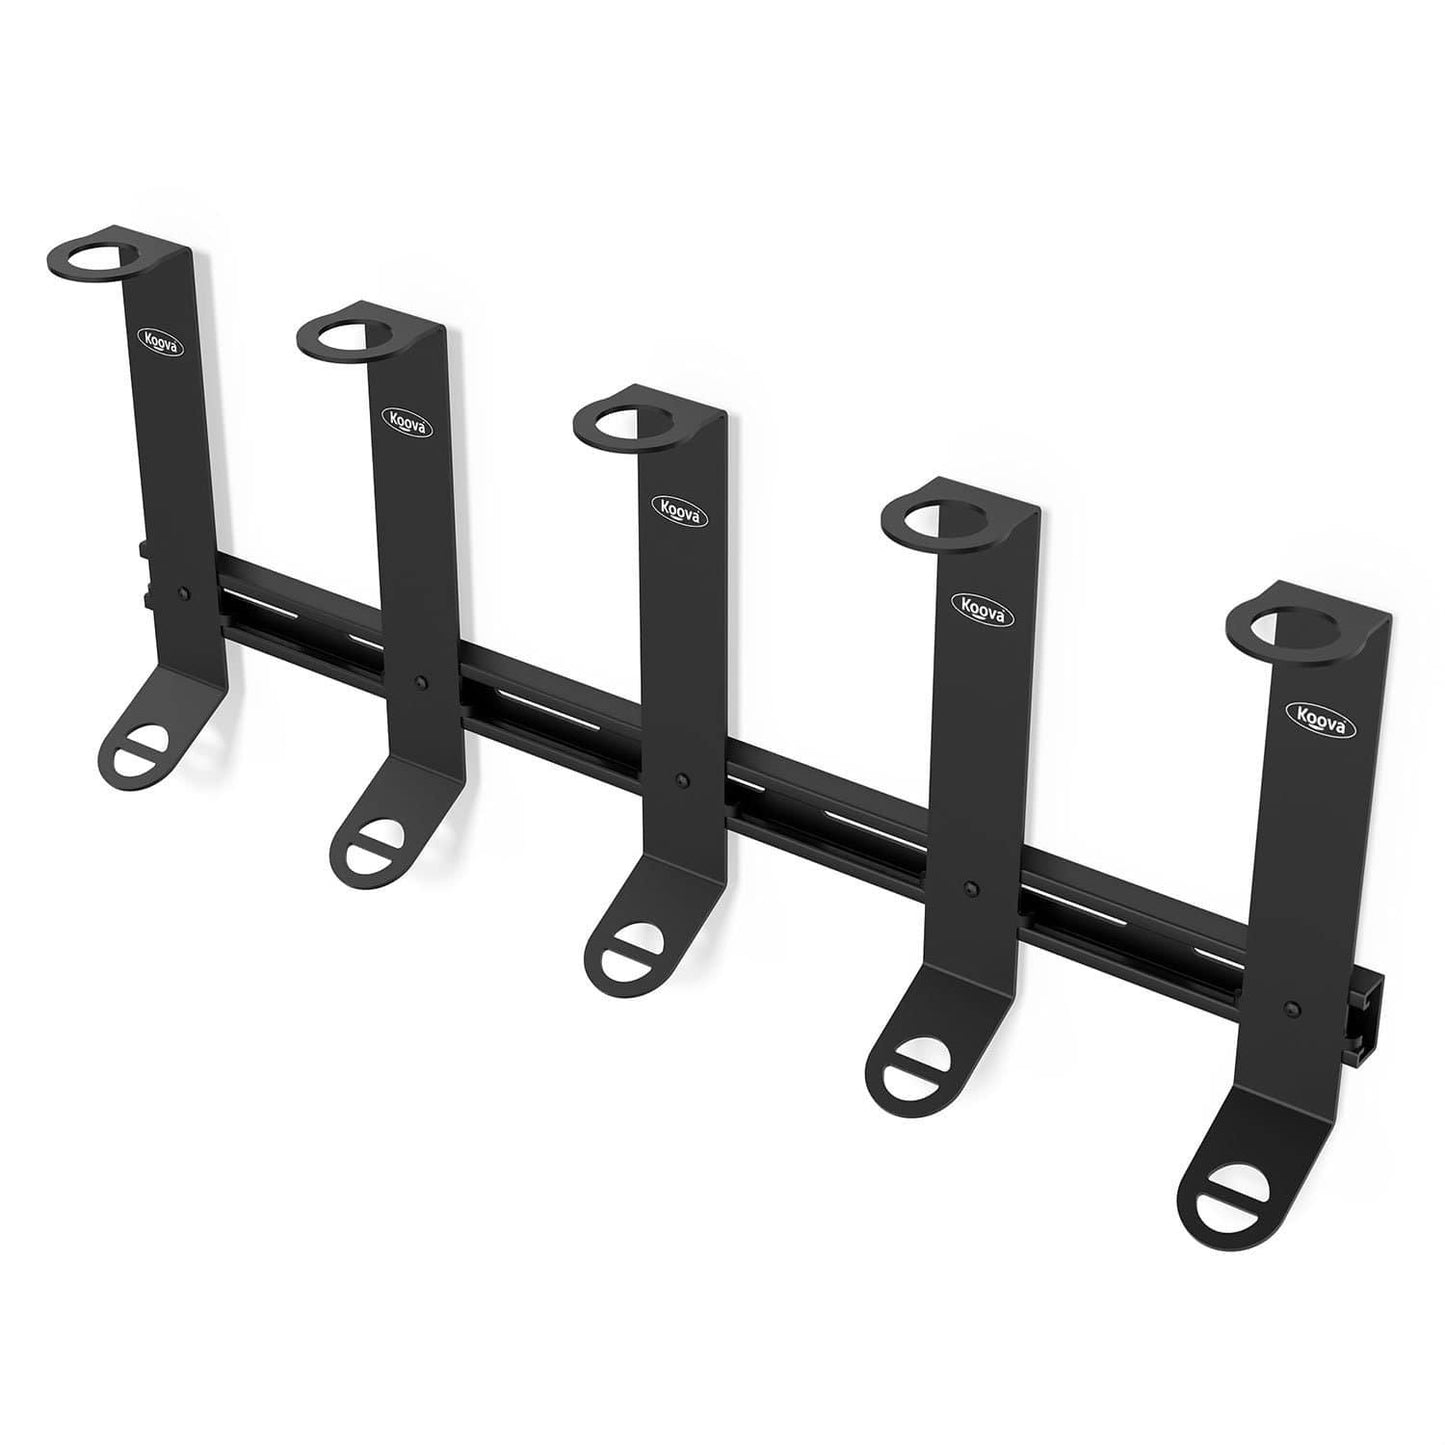 Wall mounted fishing pole rack for offshore fishing poles